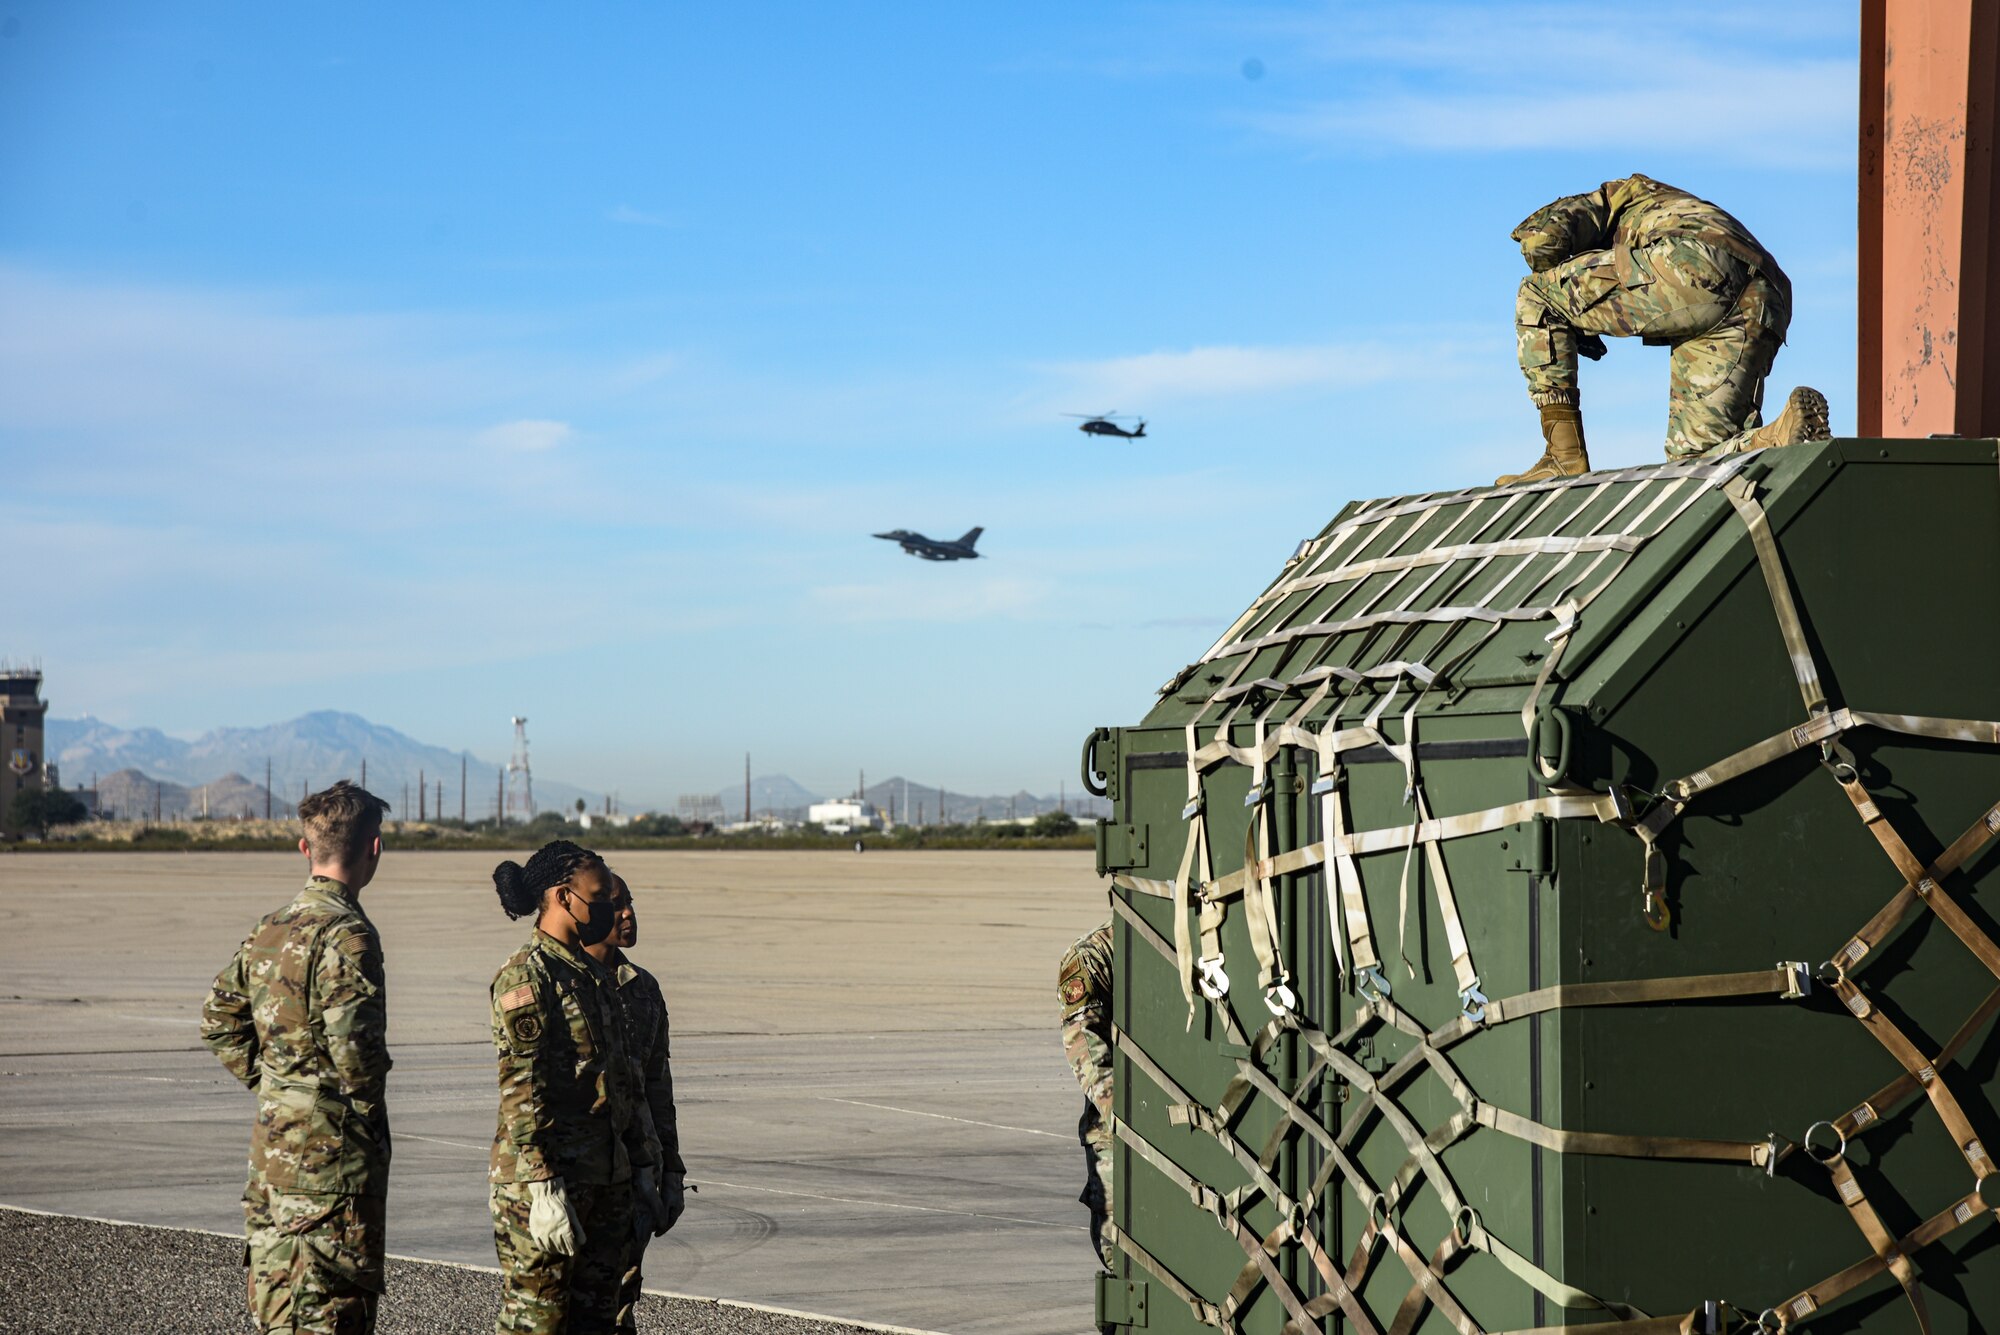 Pictured above is a group of Airmen standing around a container that has been strapped to a pallet.